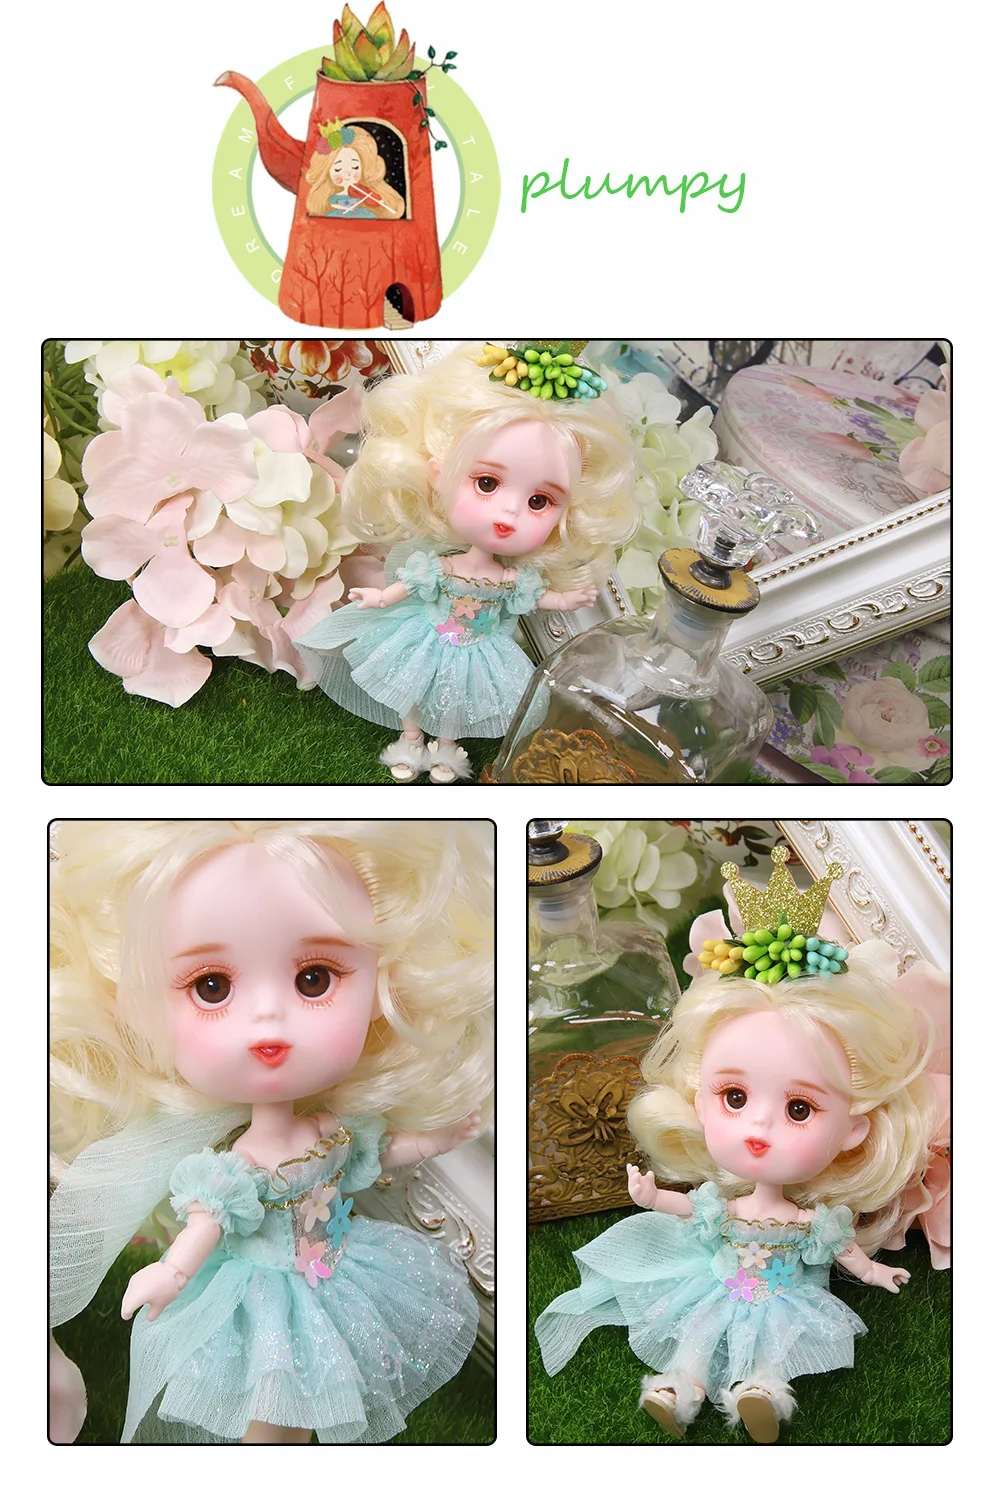 Dream Fairy 1/12 BJD doll 26 joint body ob11 mini doll with clothes shoes 14cm Cute children gift toy, name by DODO